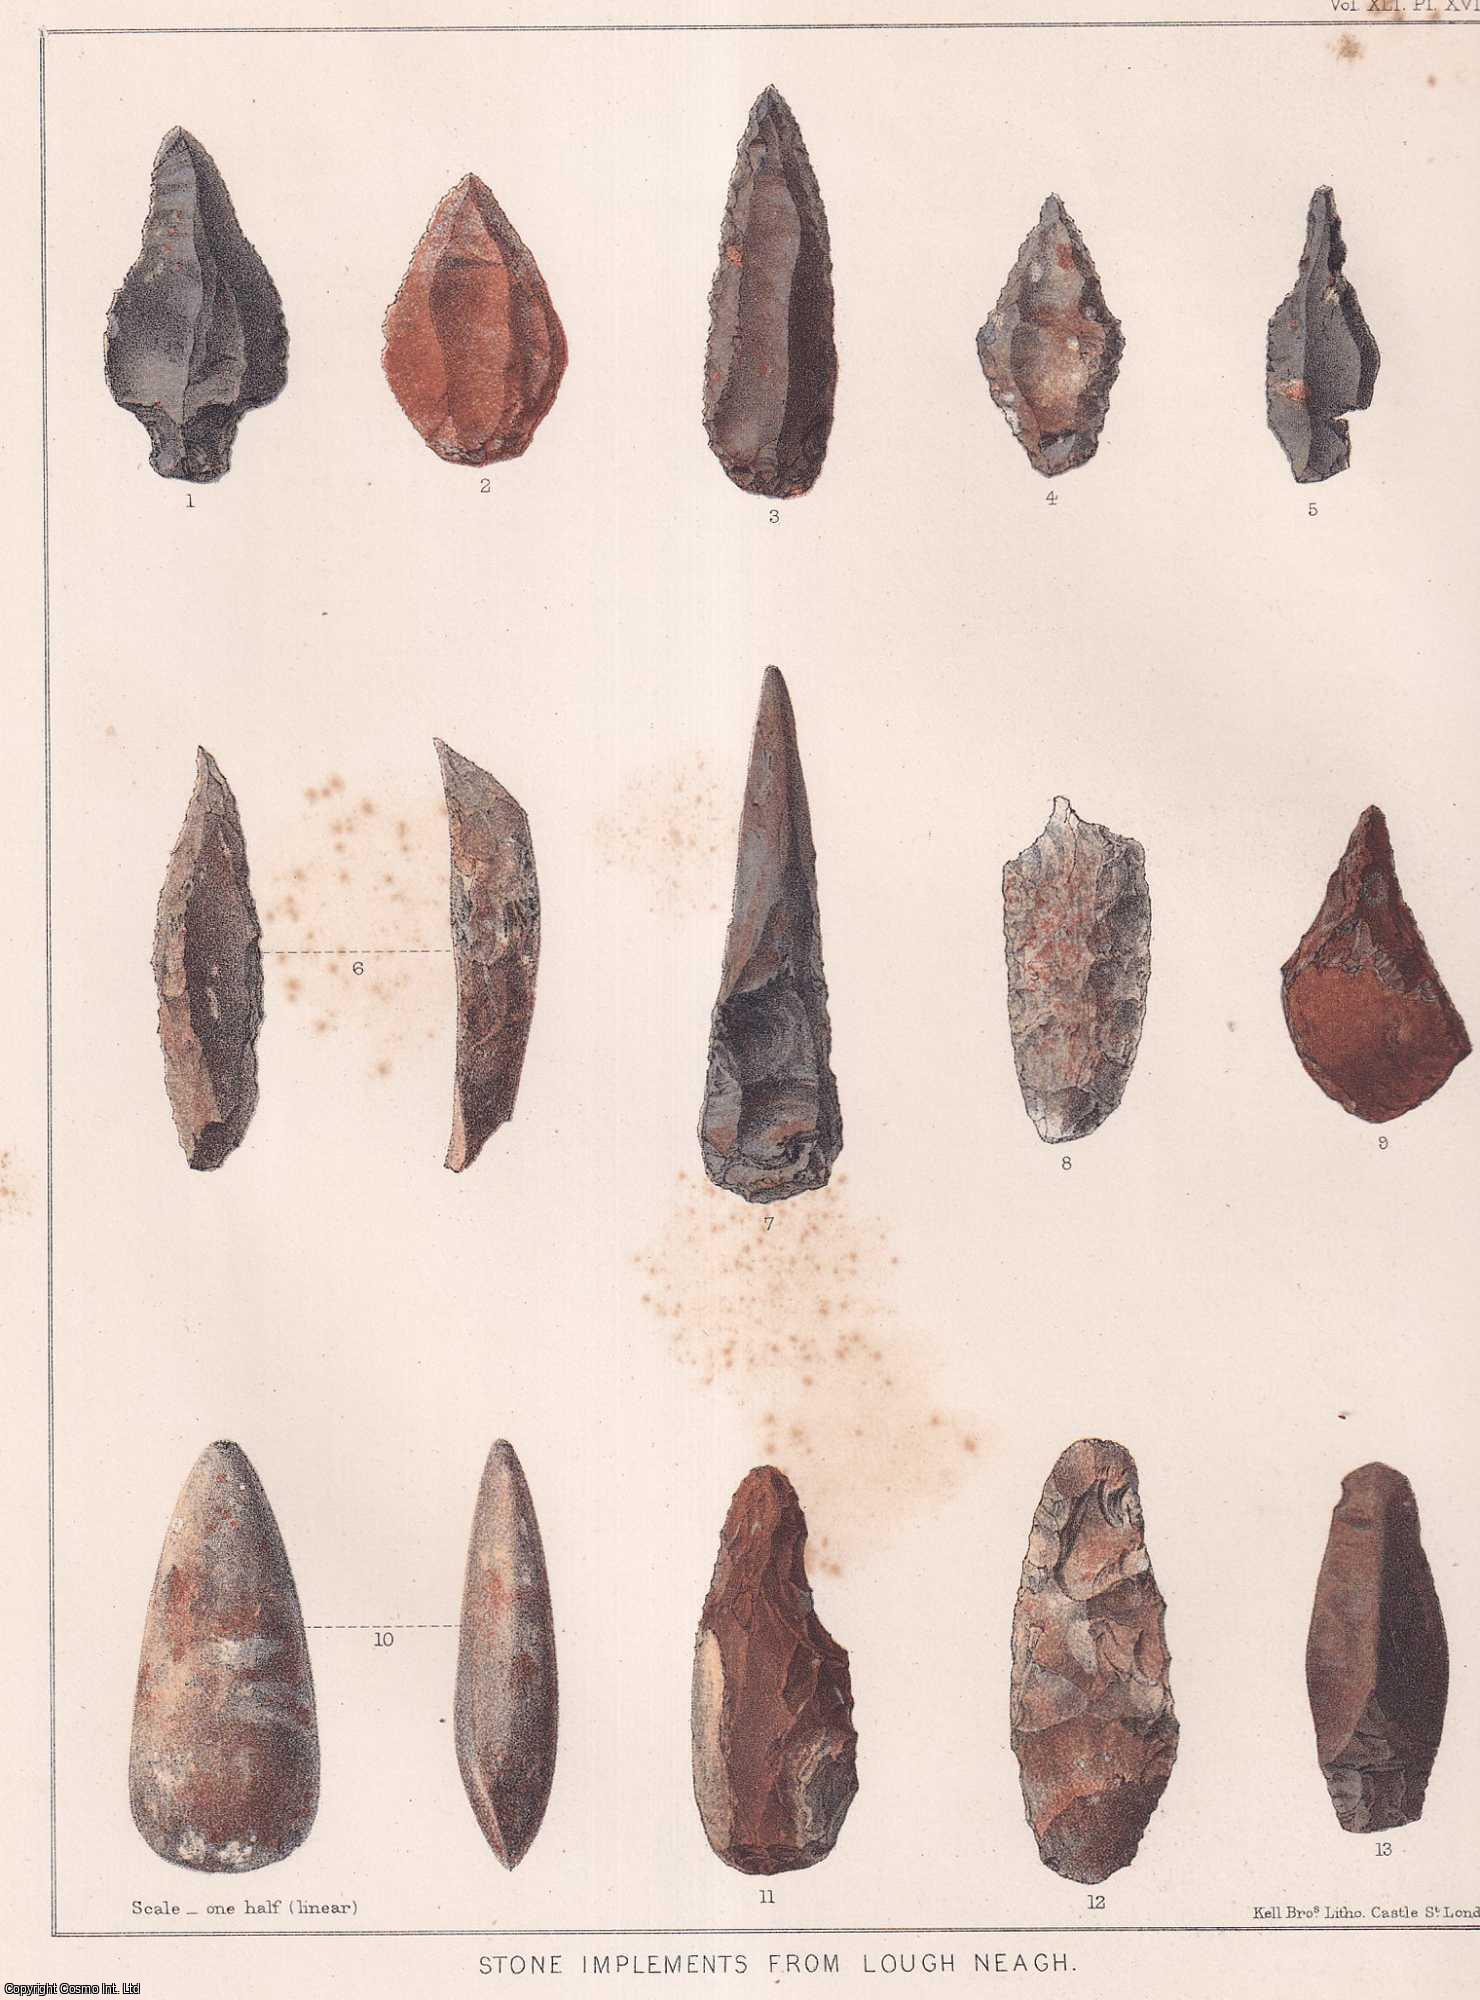 John Evans, Esq., F.R.S., F.S.A. - On some Discoveries of Stone Implements in Lough Neagh, Ireland. An uncommon original article from the journal Archaeologia, 1867.